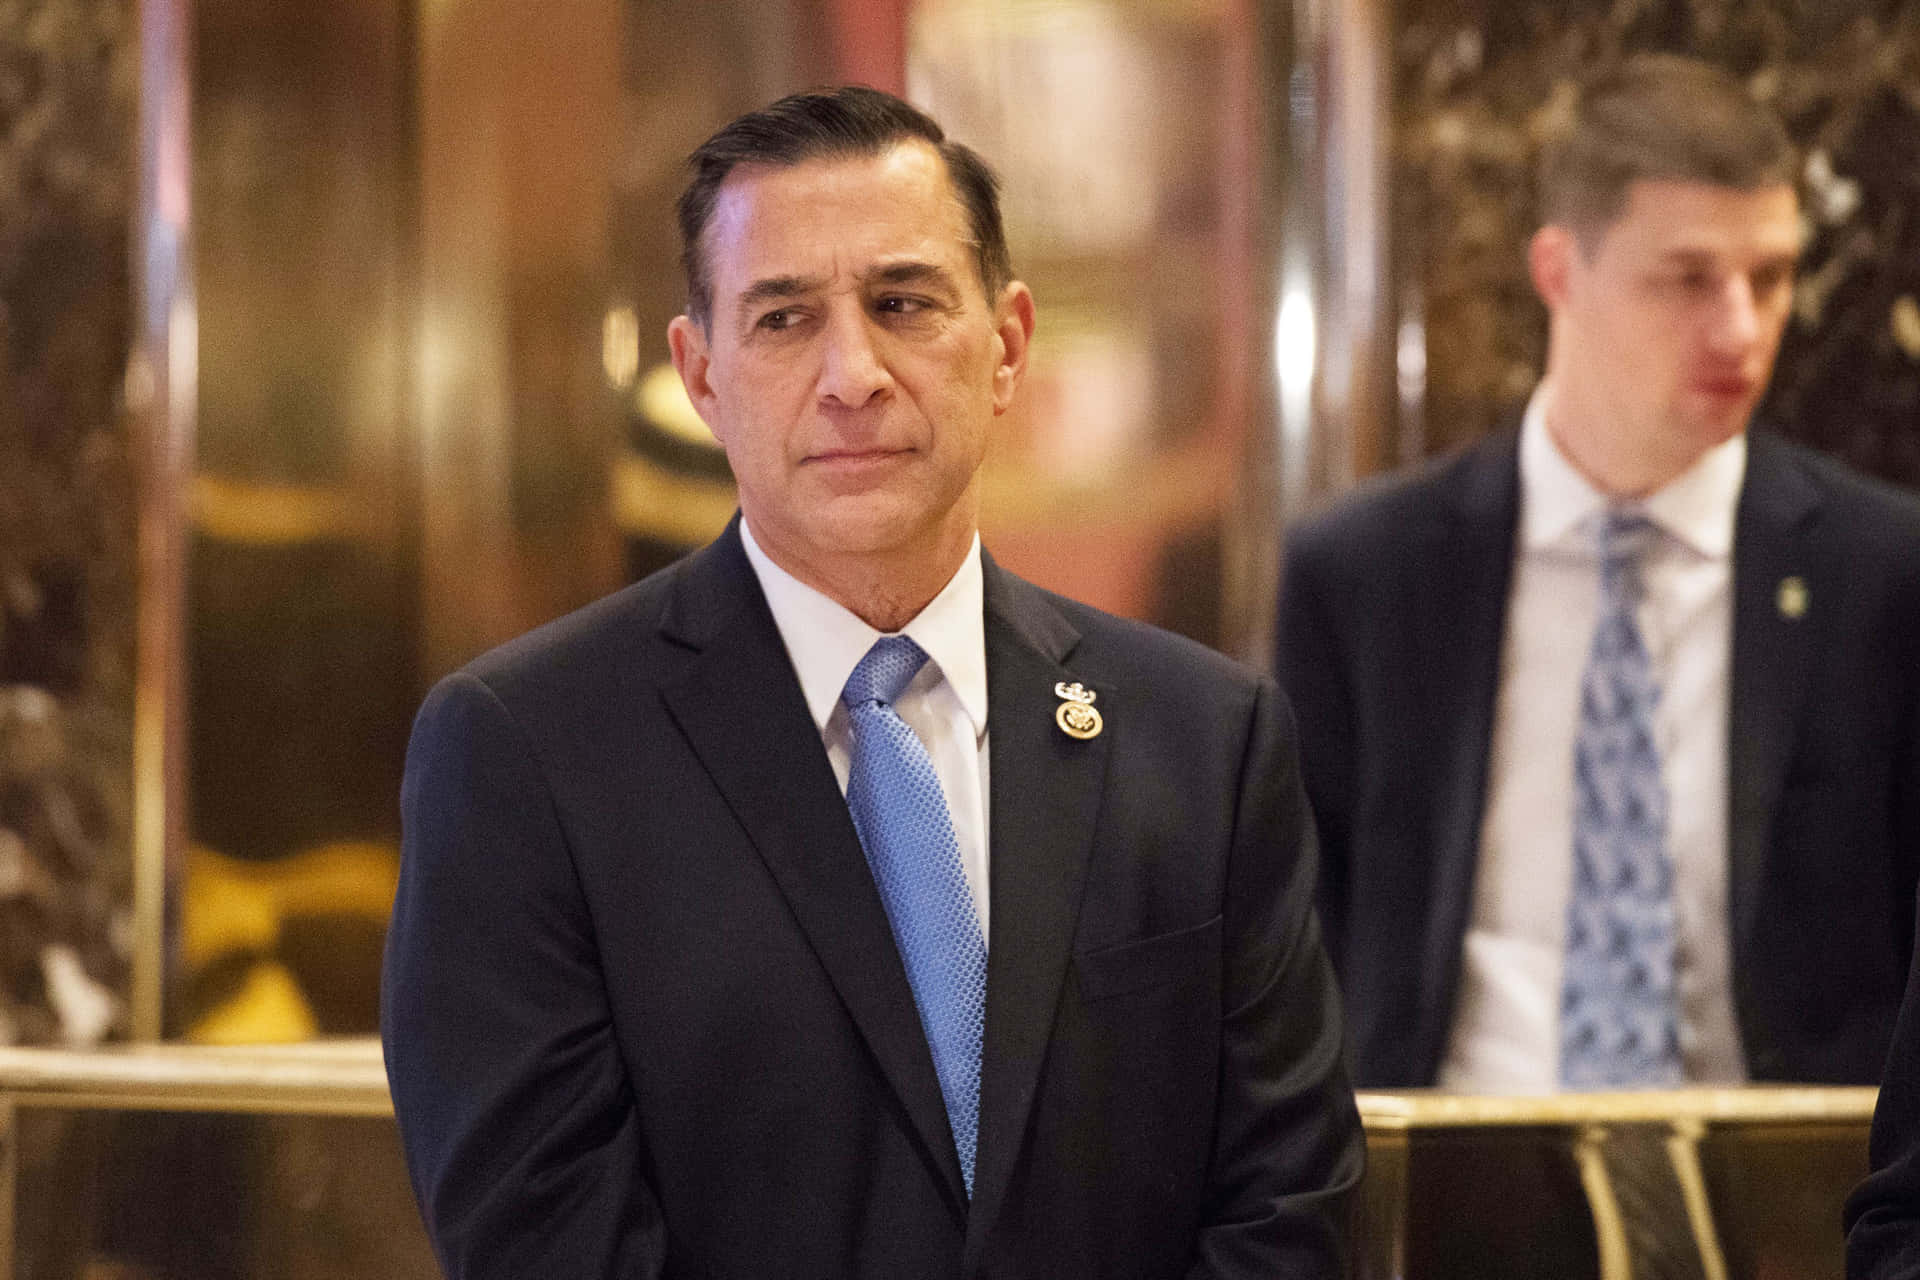 Darrell Issa Looking At The Side Wallpaper